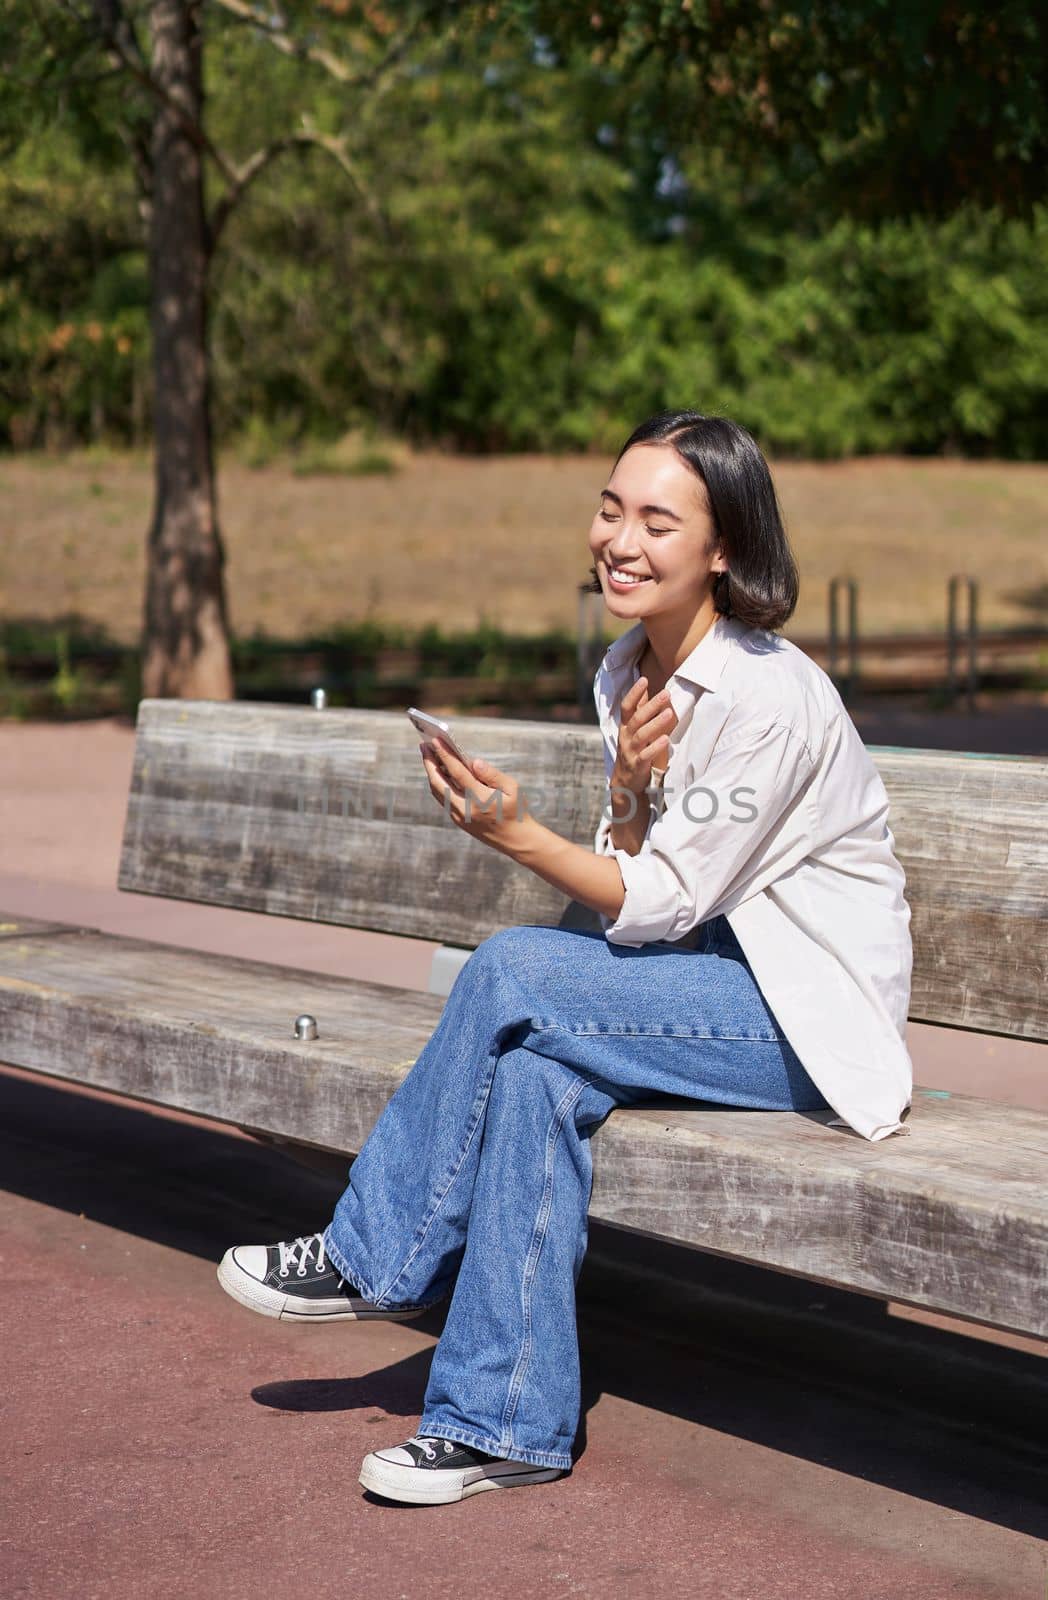 Stylish young asian girl, student sitting in park with smartphone, using telephone, waiting for someone while sitting on bench.